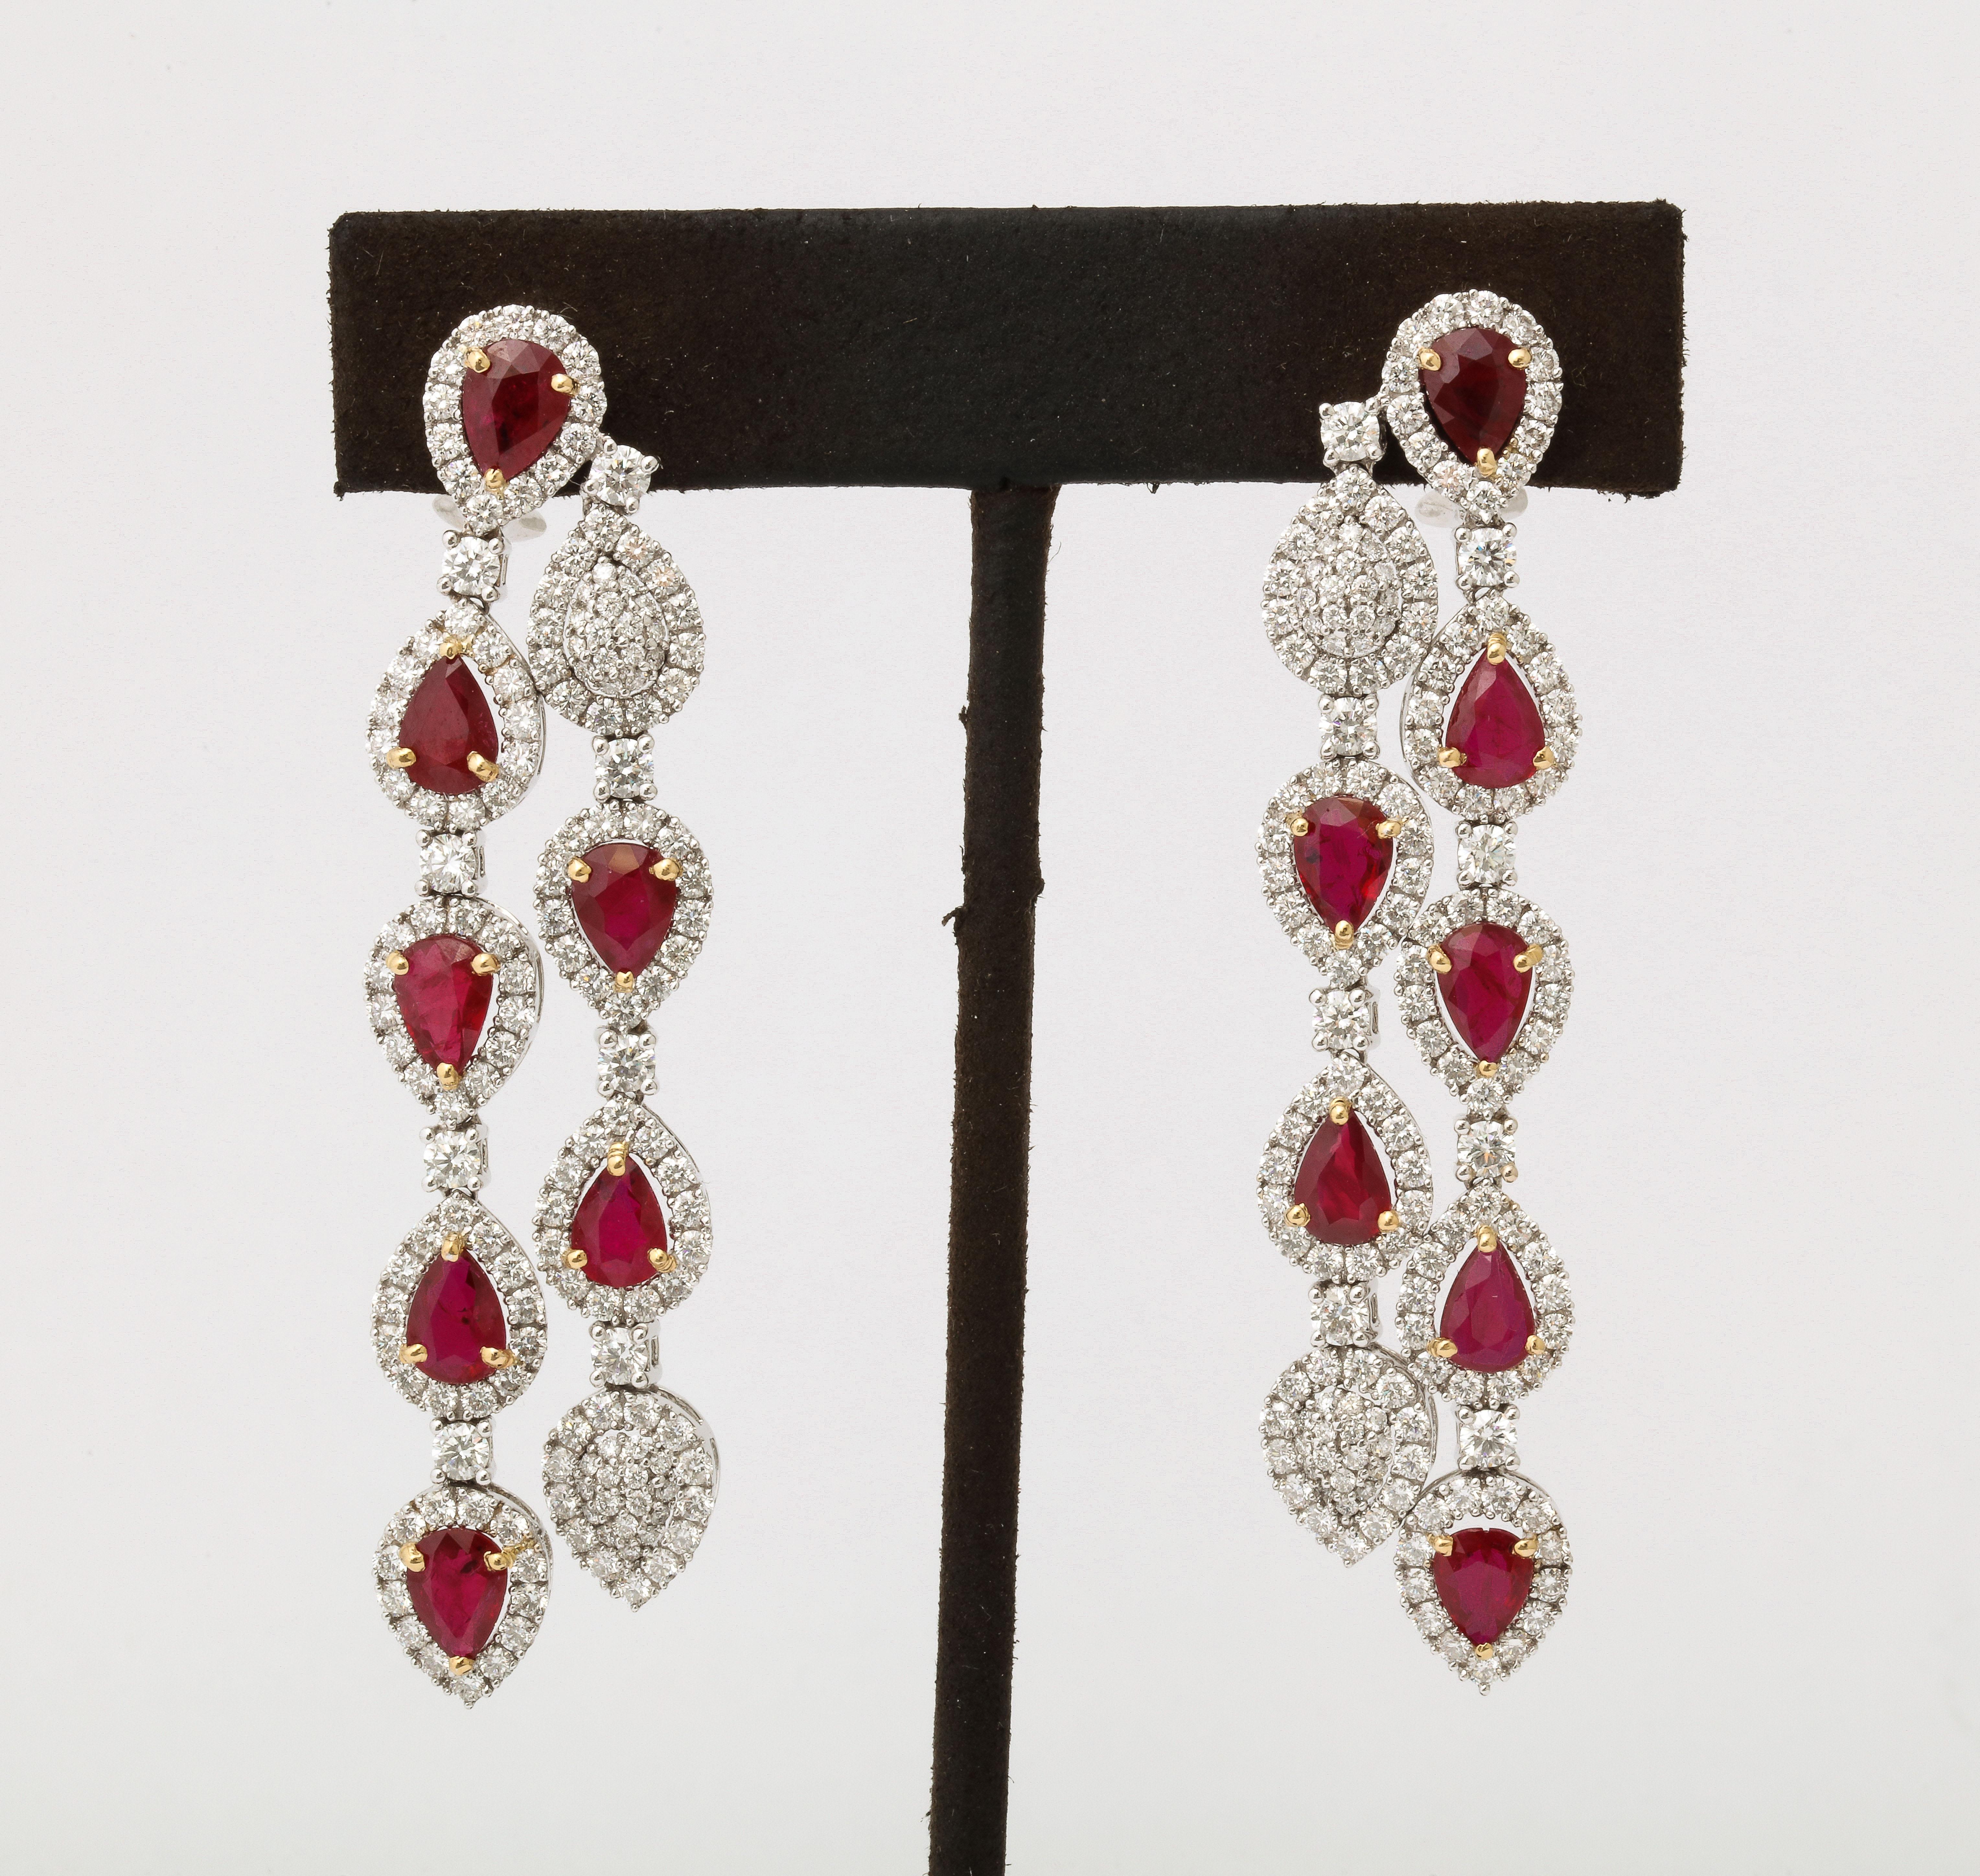 
10.15 carats of Fine Pear shape Ruby. 

7.09 carats of white round brilliant cut Diamonds. 

18k white gold 

2.6 inches long, 0.60 inches wide, approximately. 

A beautiful earring with fantastic movement and a pop of color! 